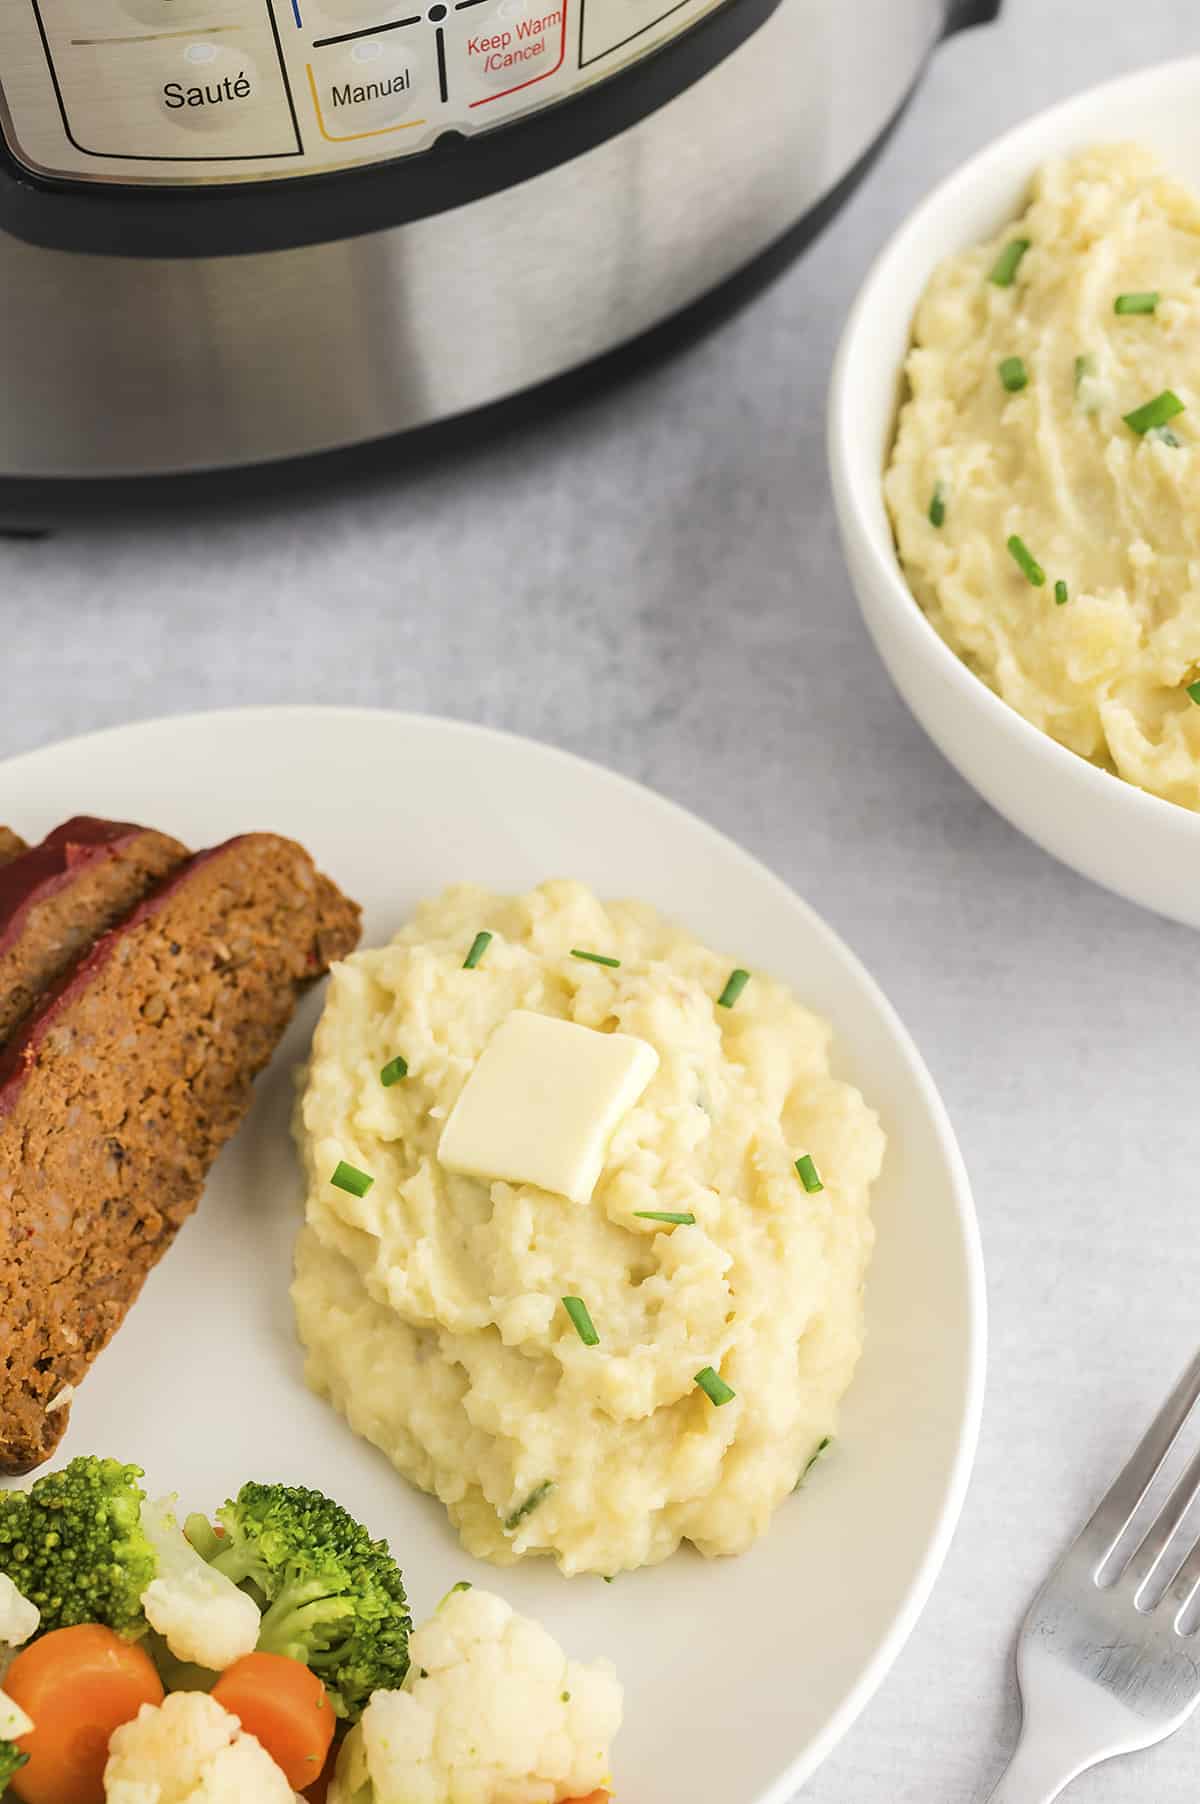 Mashed potatoes, meatloaf, and vegetables on plate.